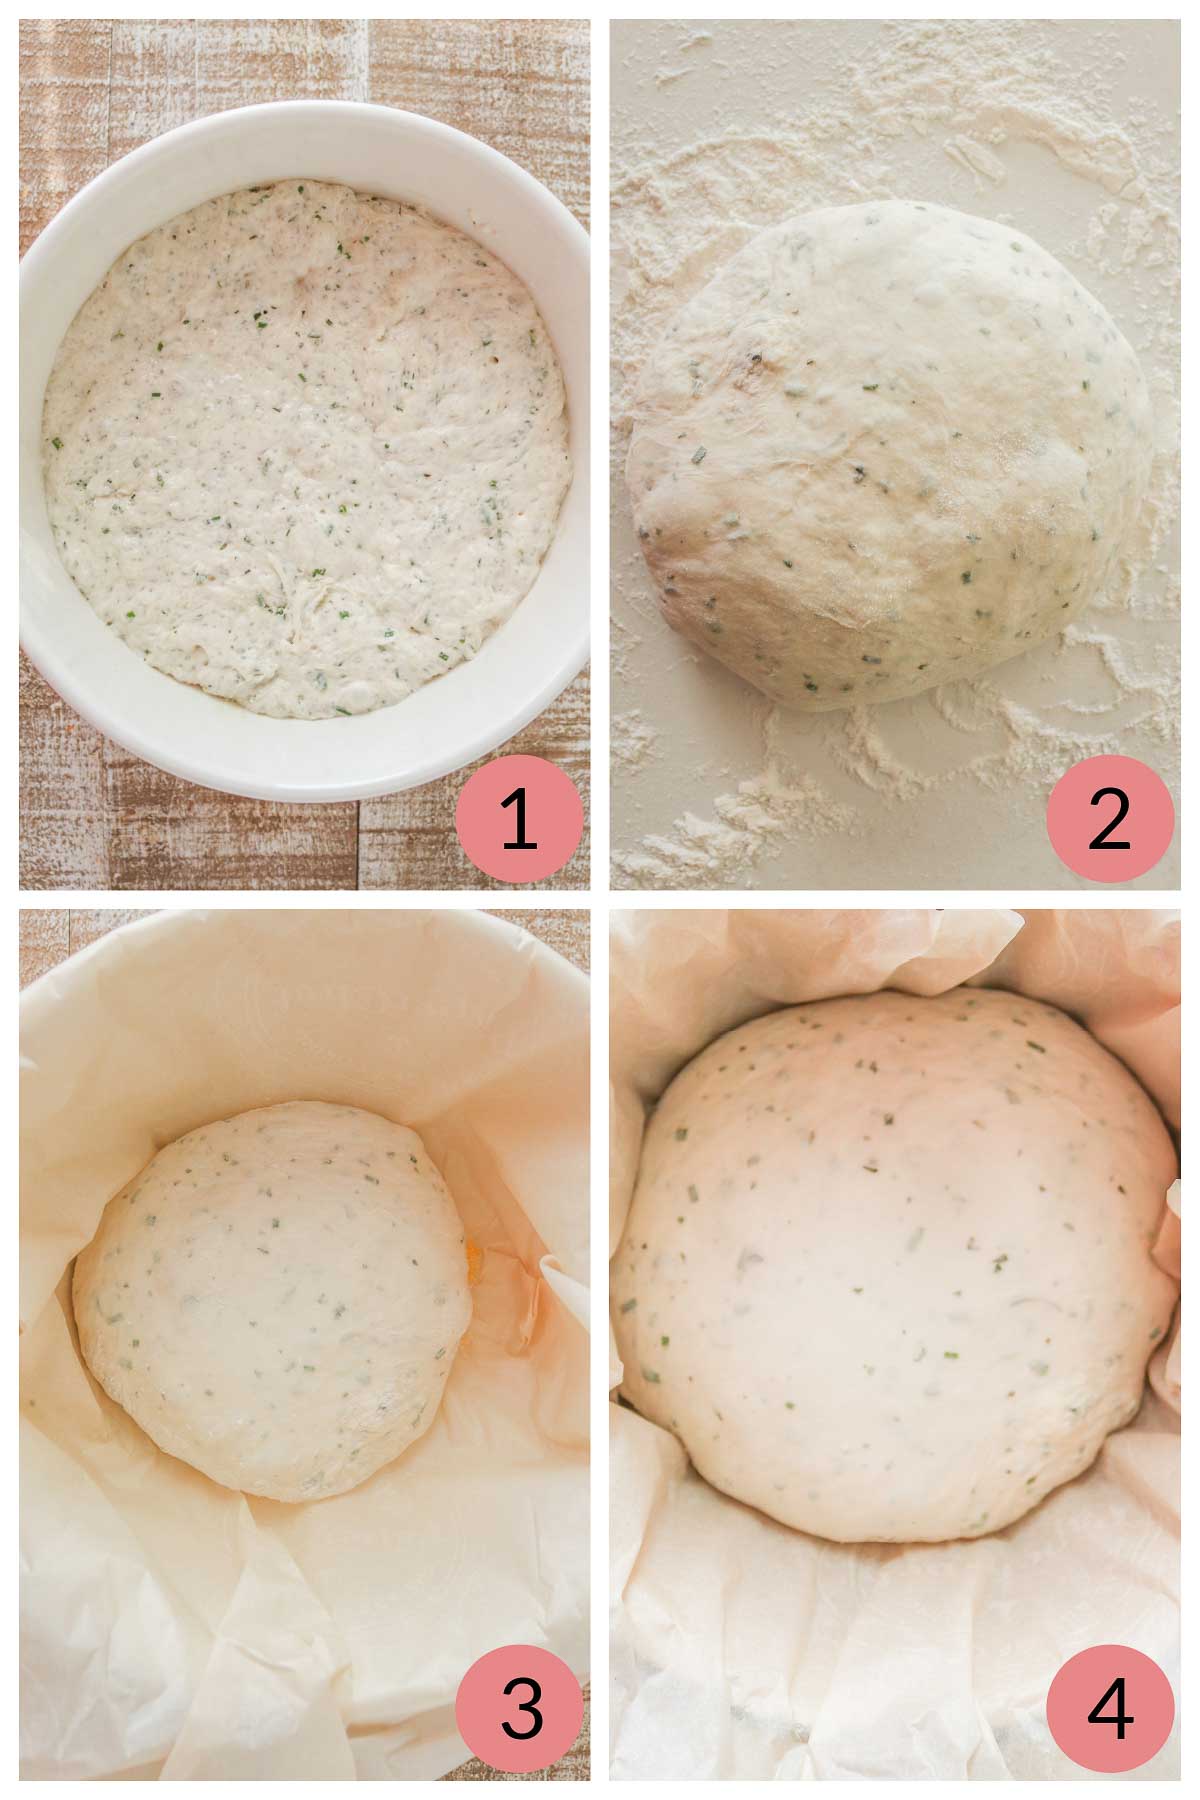 How To Make Bread With Parmesan Cheese